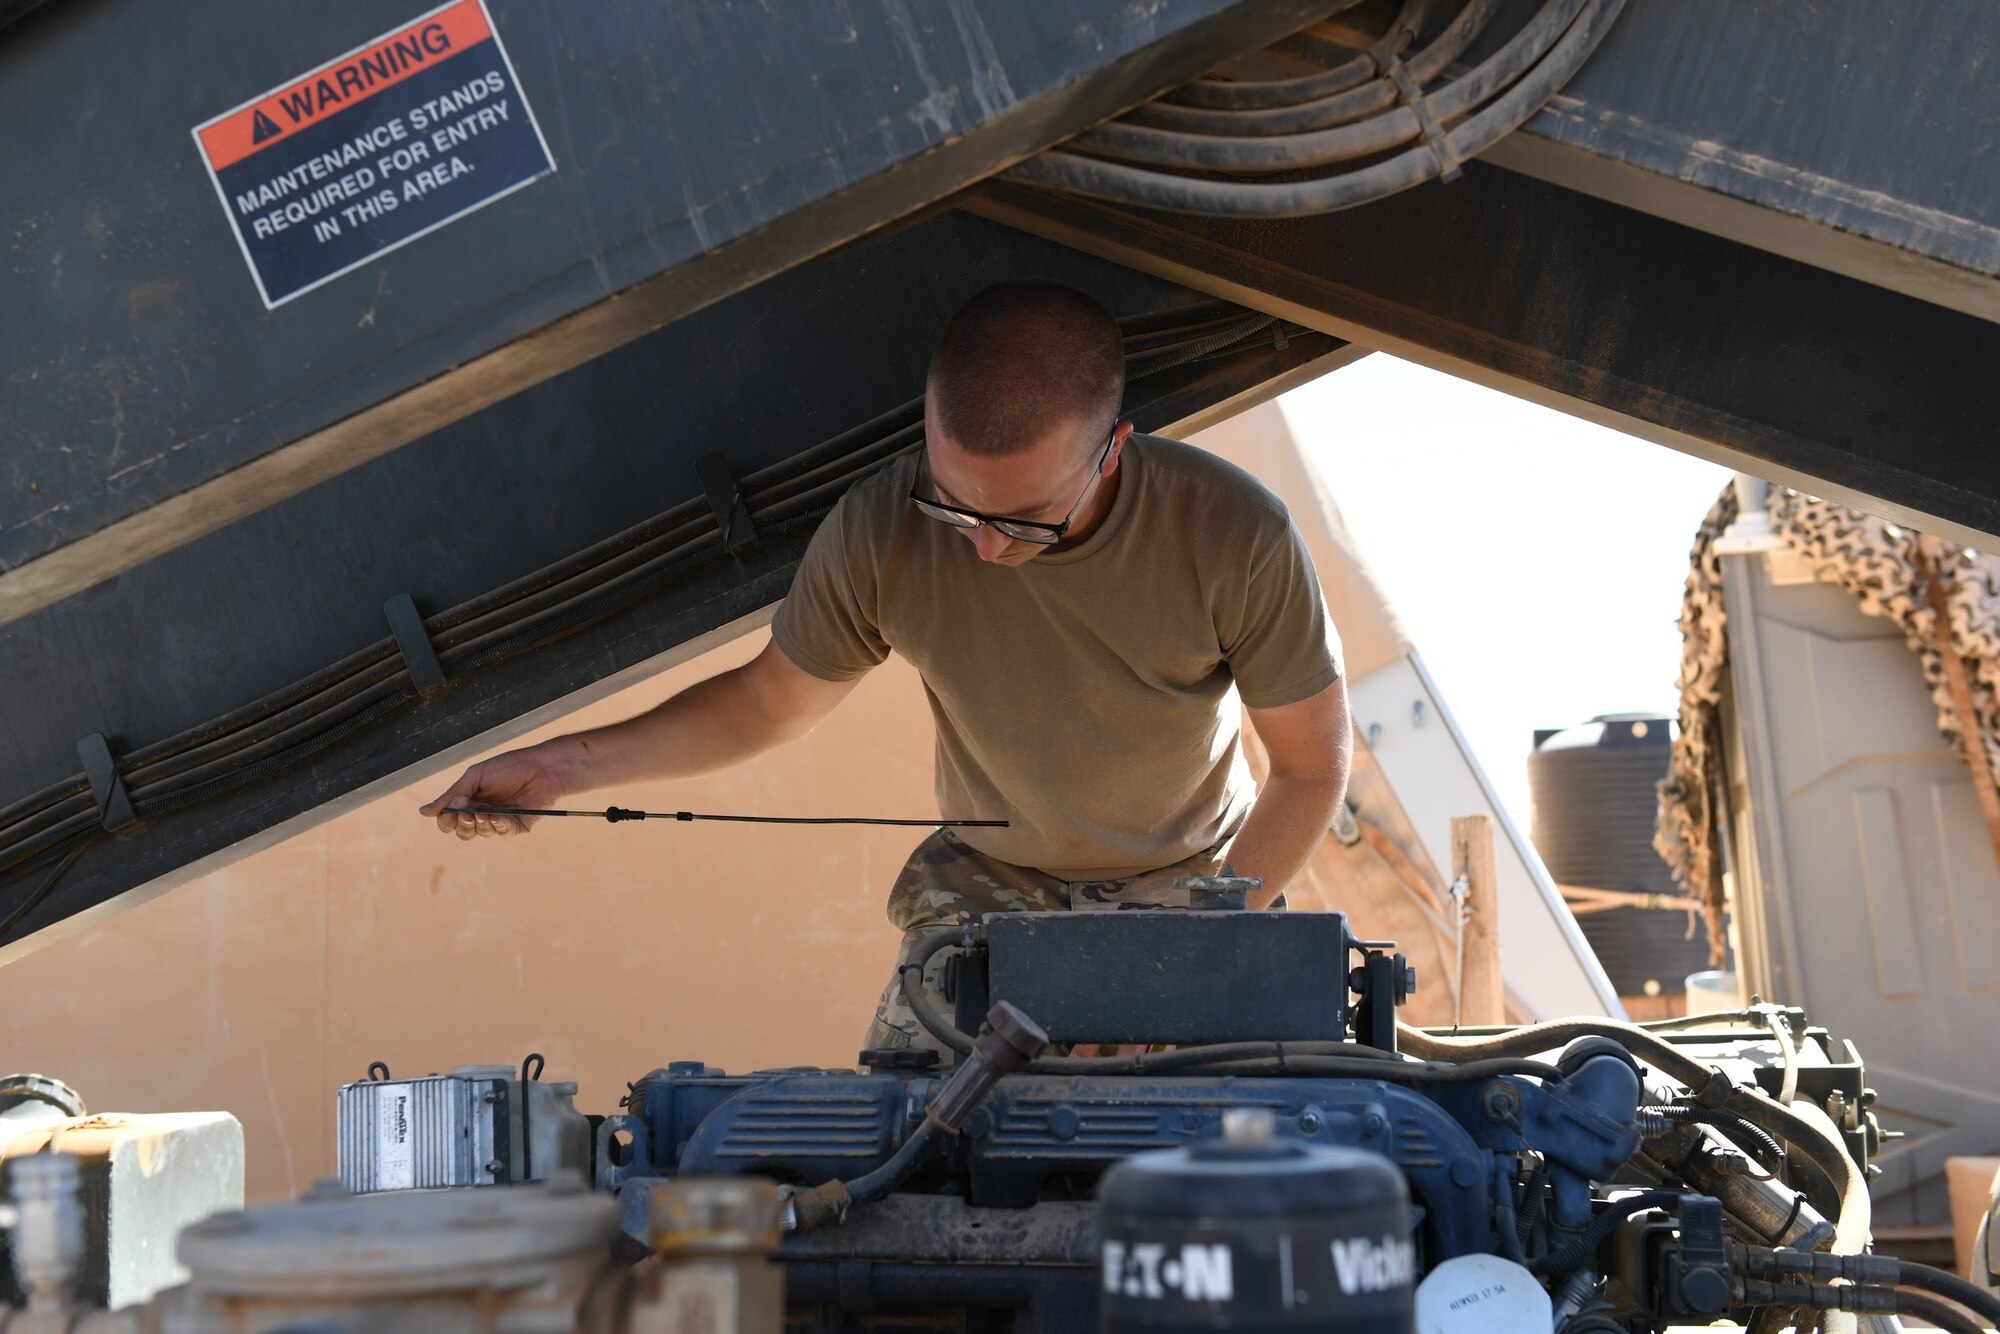 U.S. Air Force Senior Airman Ryan Davis, 724th Expeditionary Air Base Squadron air terminal operations center journeyman, checks the oil level in a Halvorsen 25K-Loader, at Nigerien Air Base 201, Agadez, Niger, Jan 4, 2021. ATOC is responsible for air transportation operations including cargo upload/download, cargo processing, special handling, passengers, and load planning. (U.S. Air Force photo by Senior Airman Gabrielle Winn)